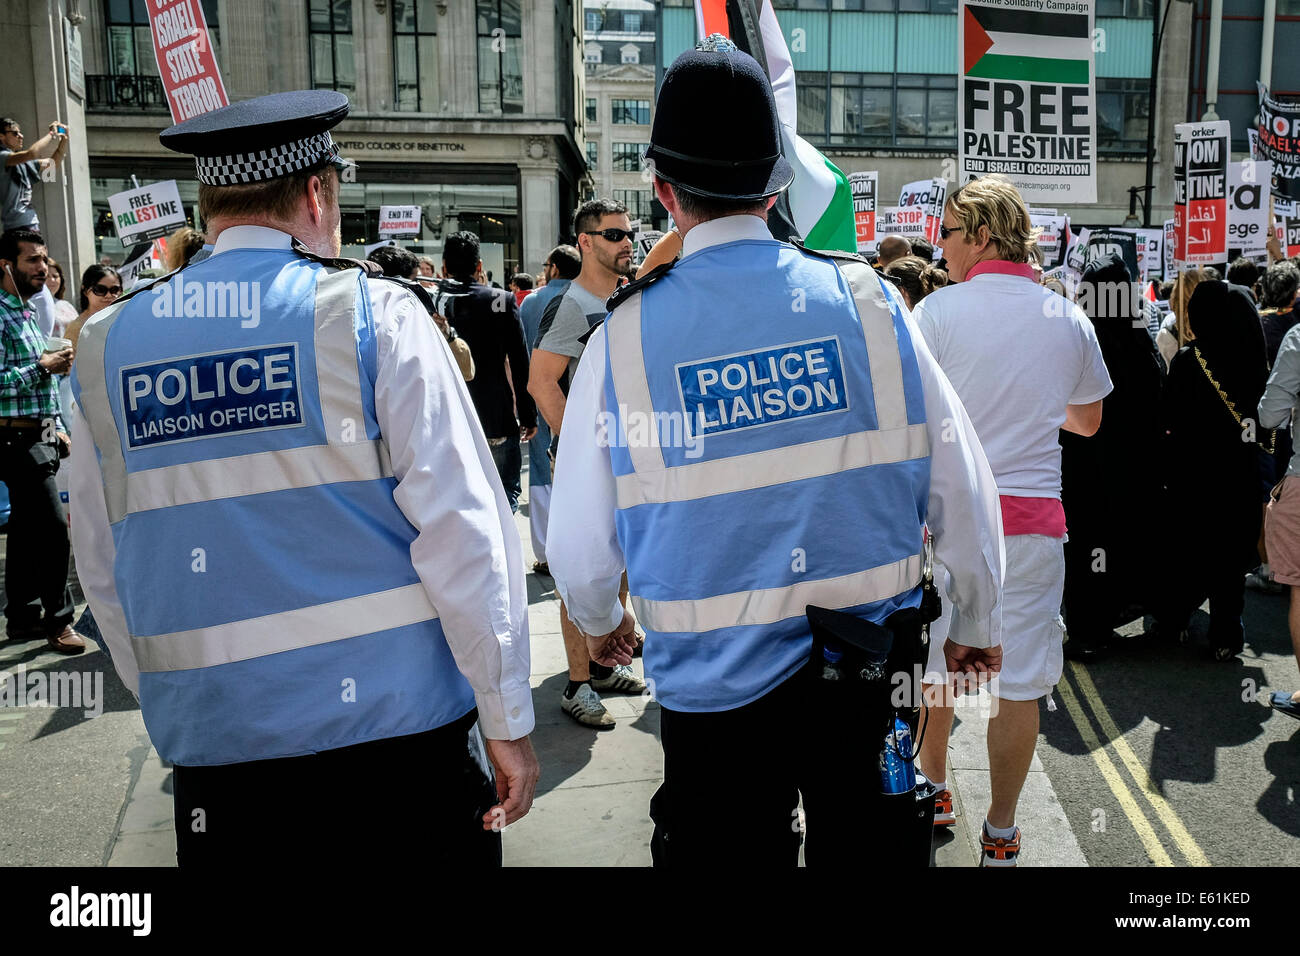 Two Police Liaison Officers on duty at a demonstration in London. Stock Photo